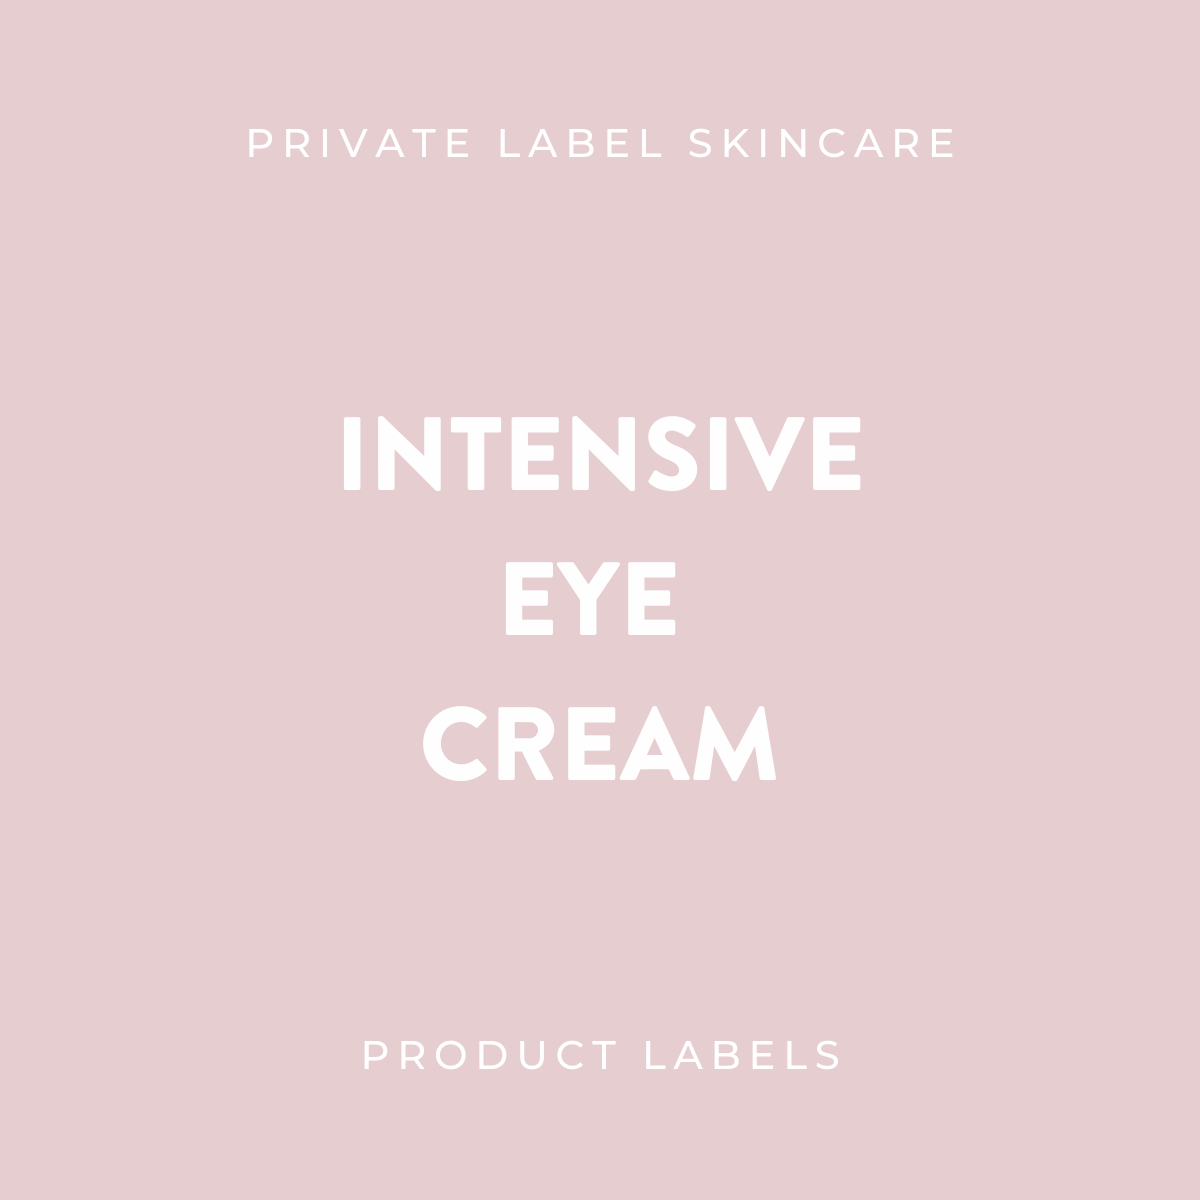 Intensive Eye Cream Product Labels (x 20 labels)